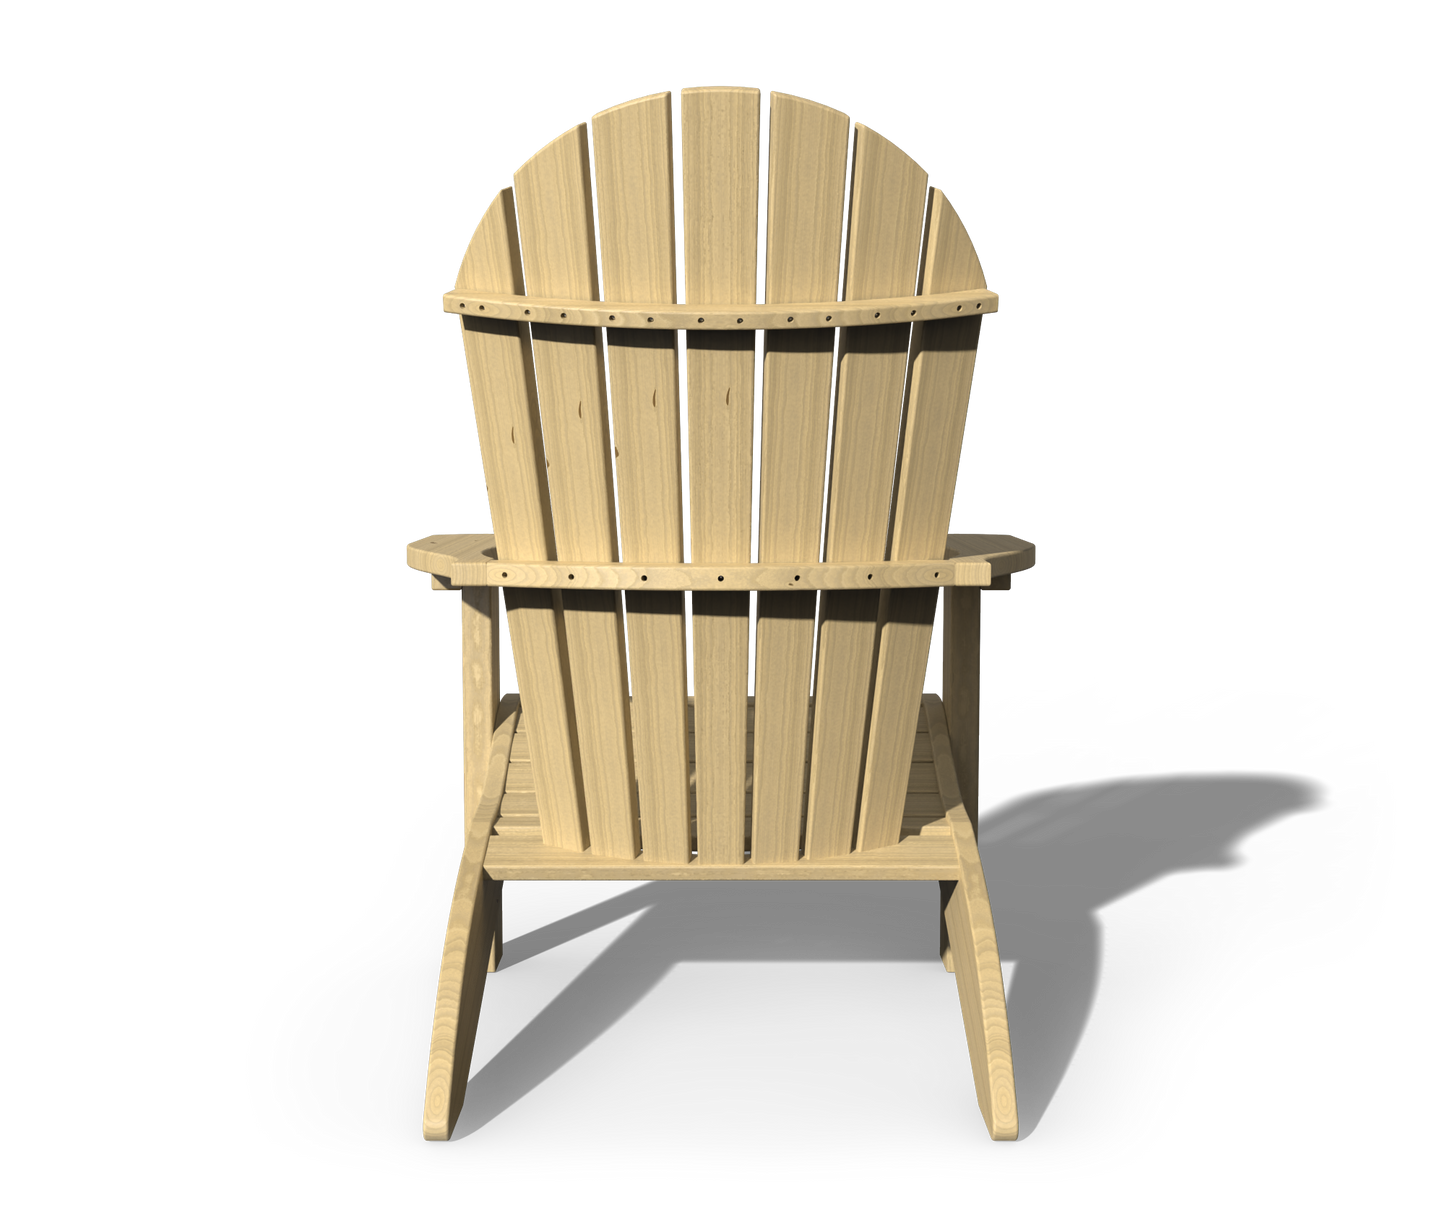 Patiova Amish Crafted Pressure Treated Pine Adirondack Chair - LEAD TIME TO SHIP 3 WEEKS